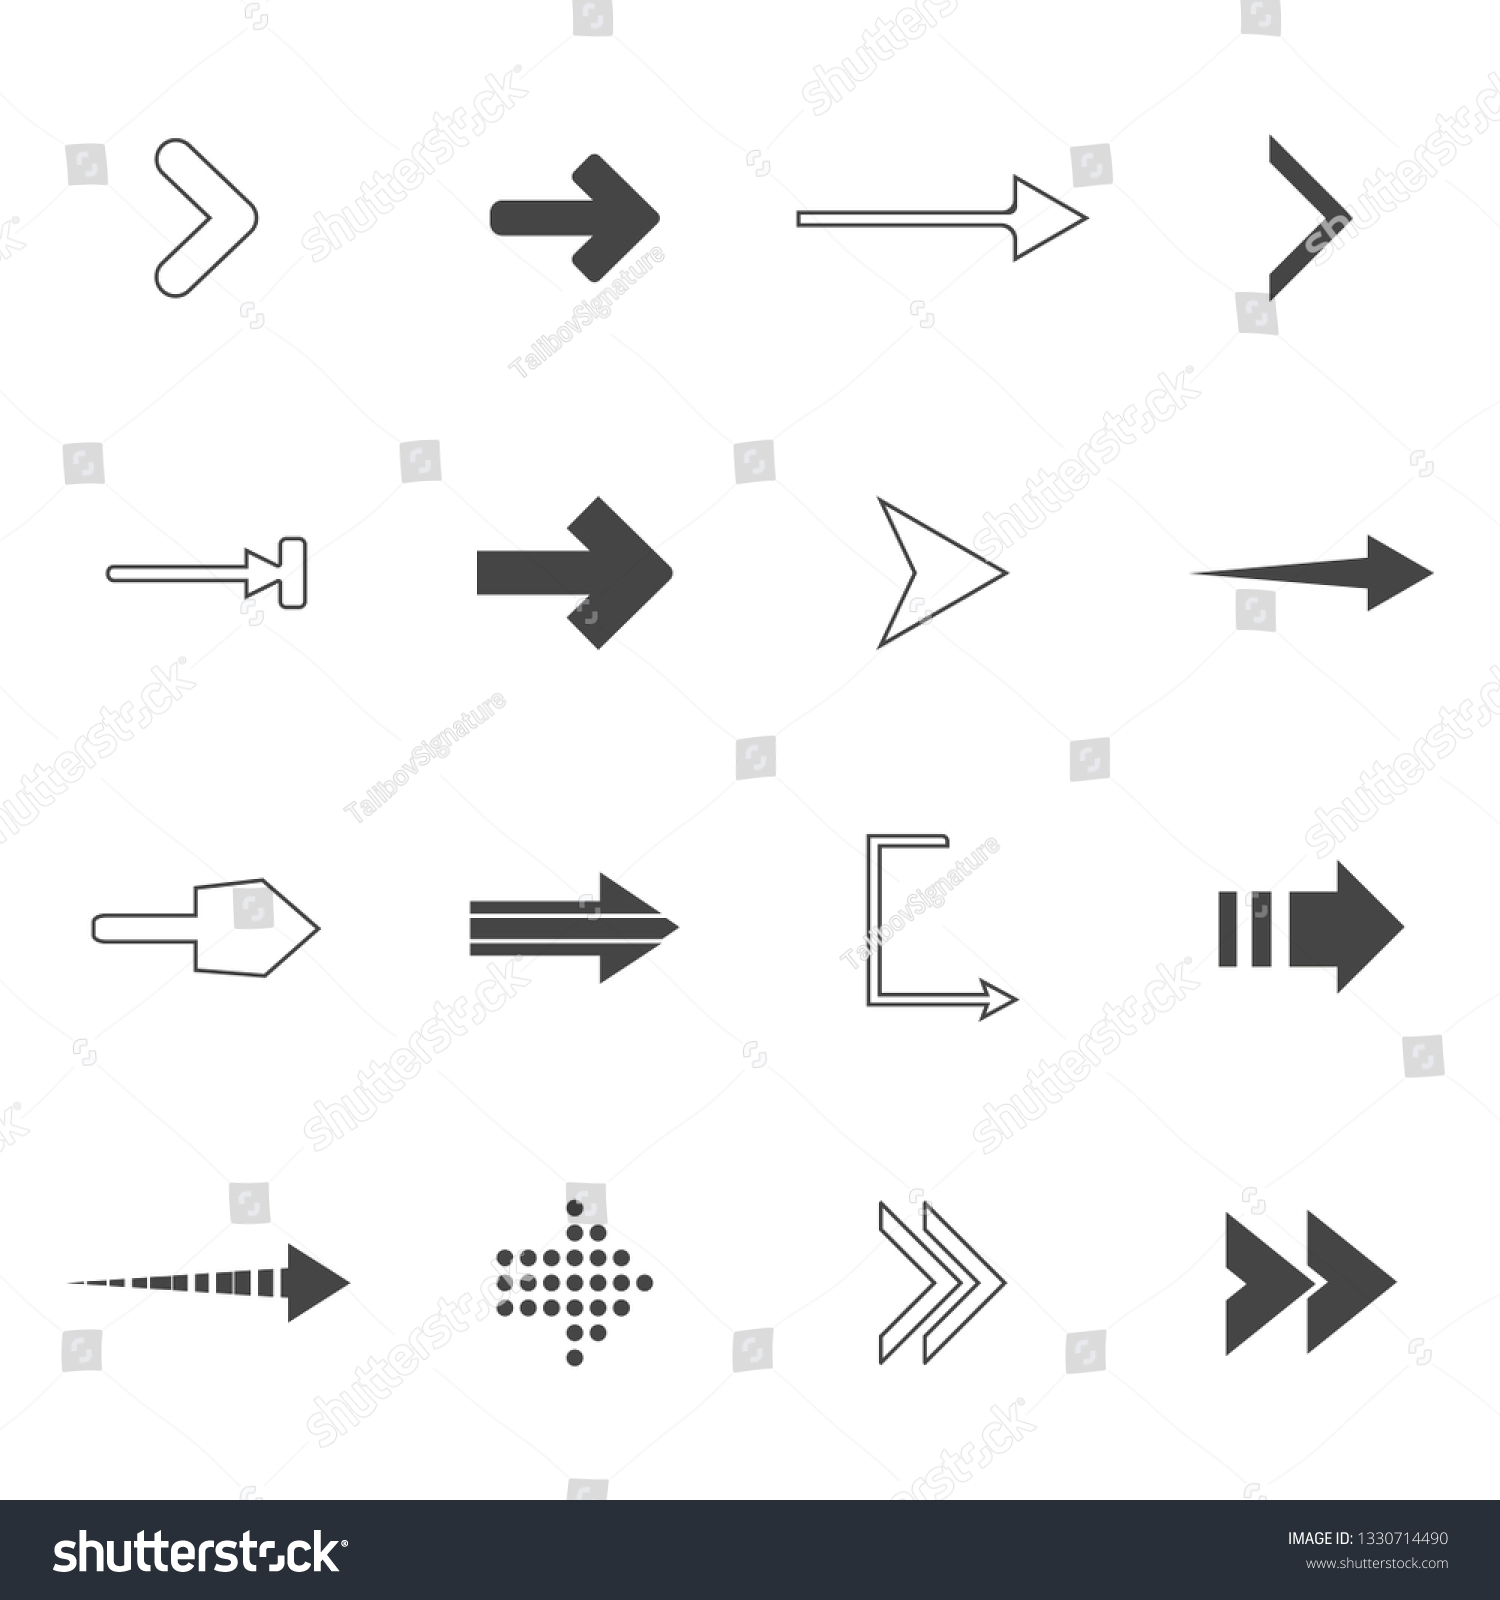 direction arrows icons set. road signs icons set. Vector illustration #1330714490